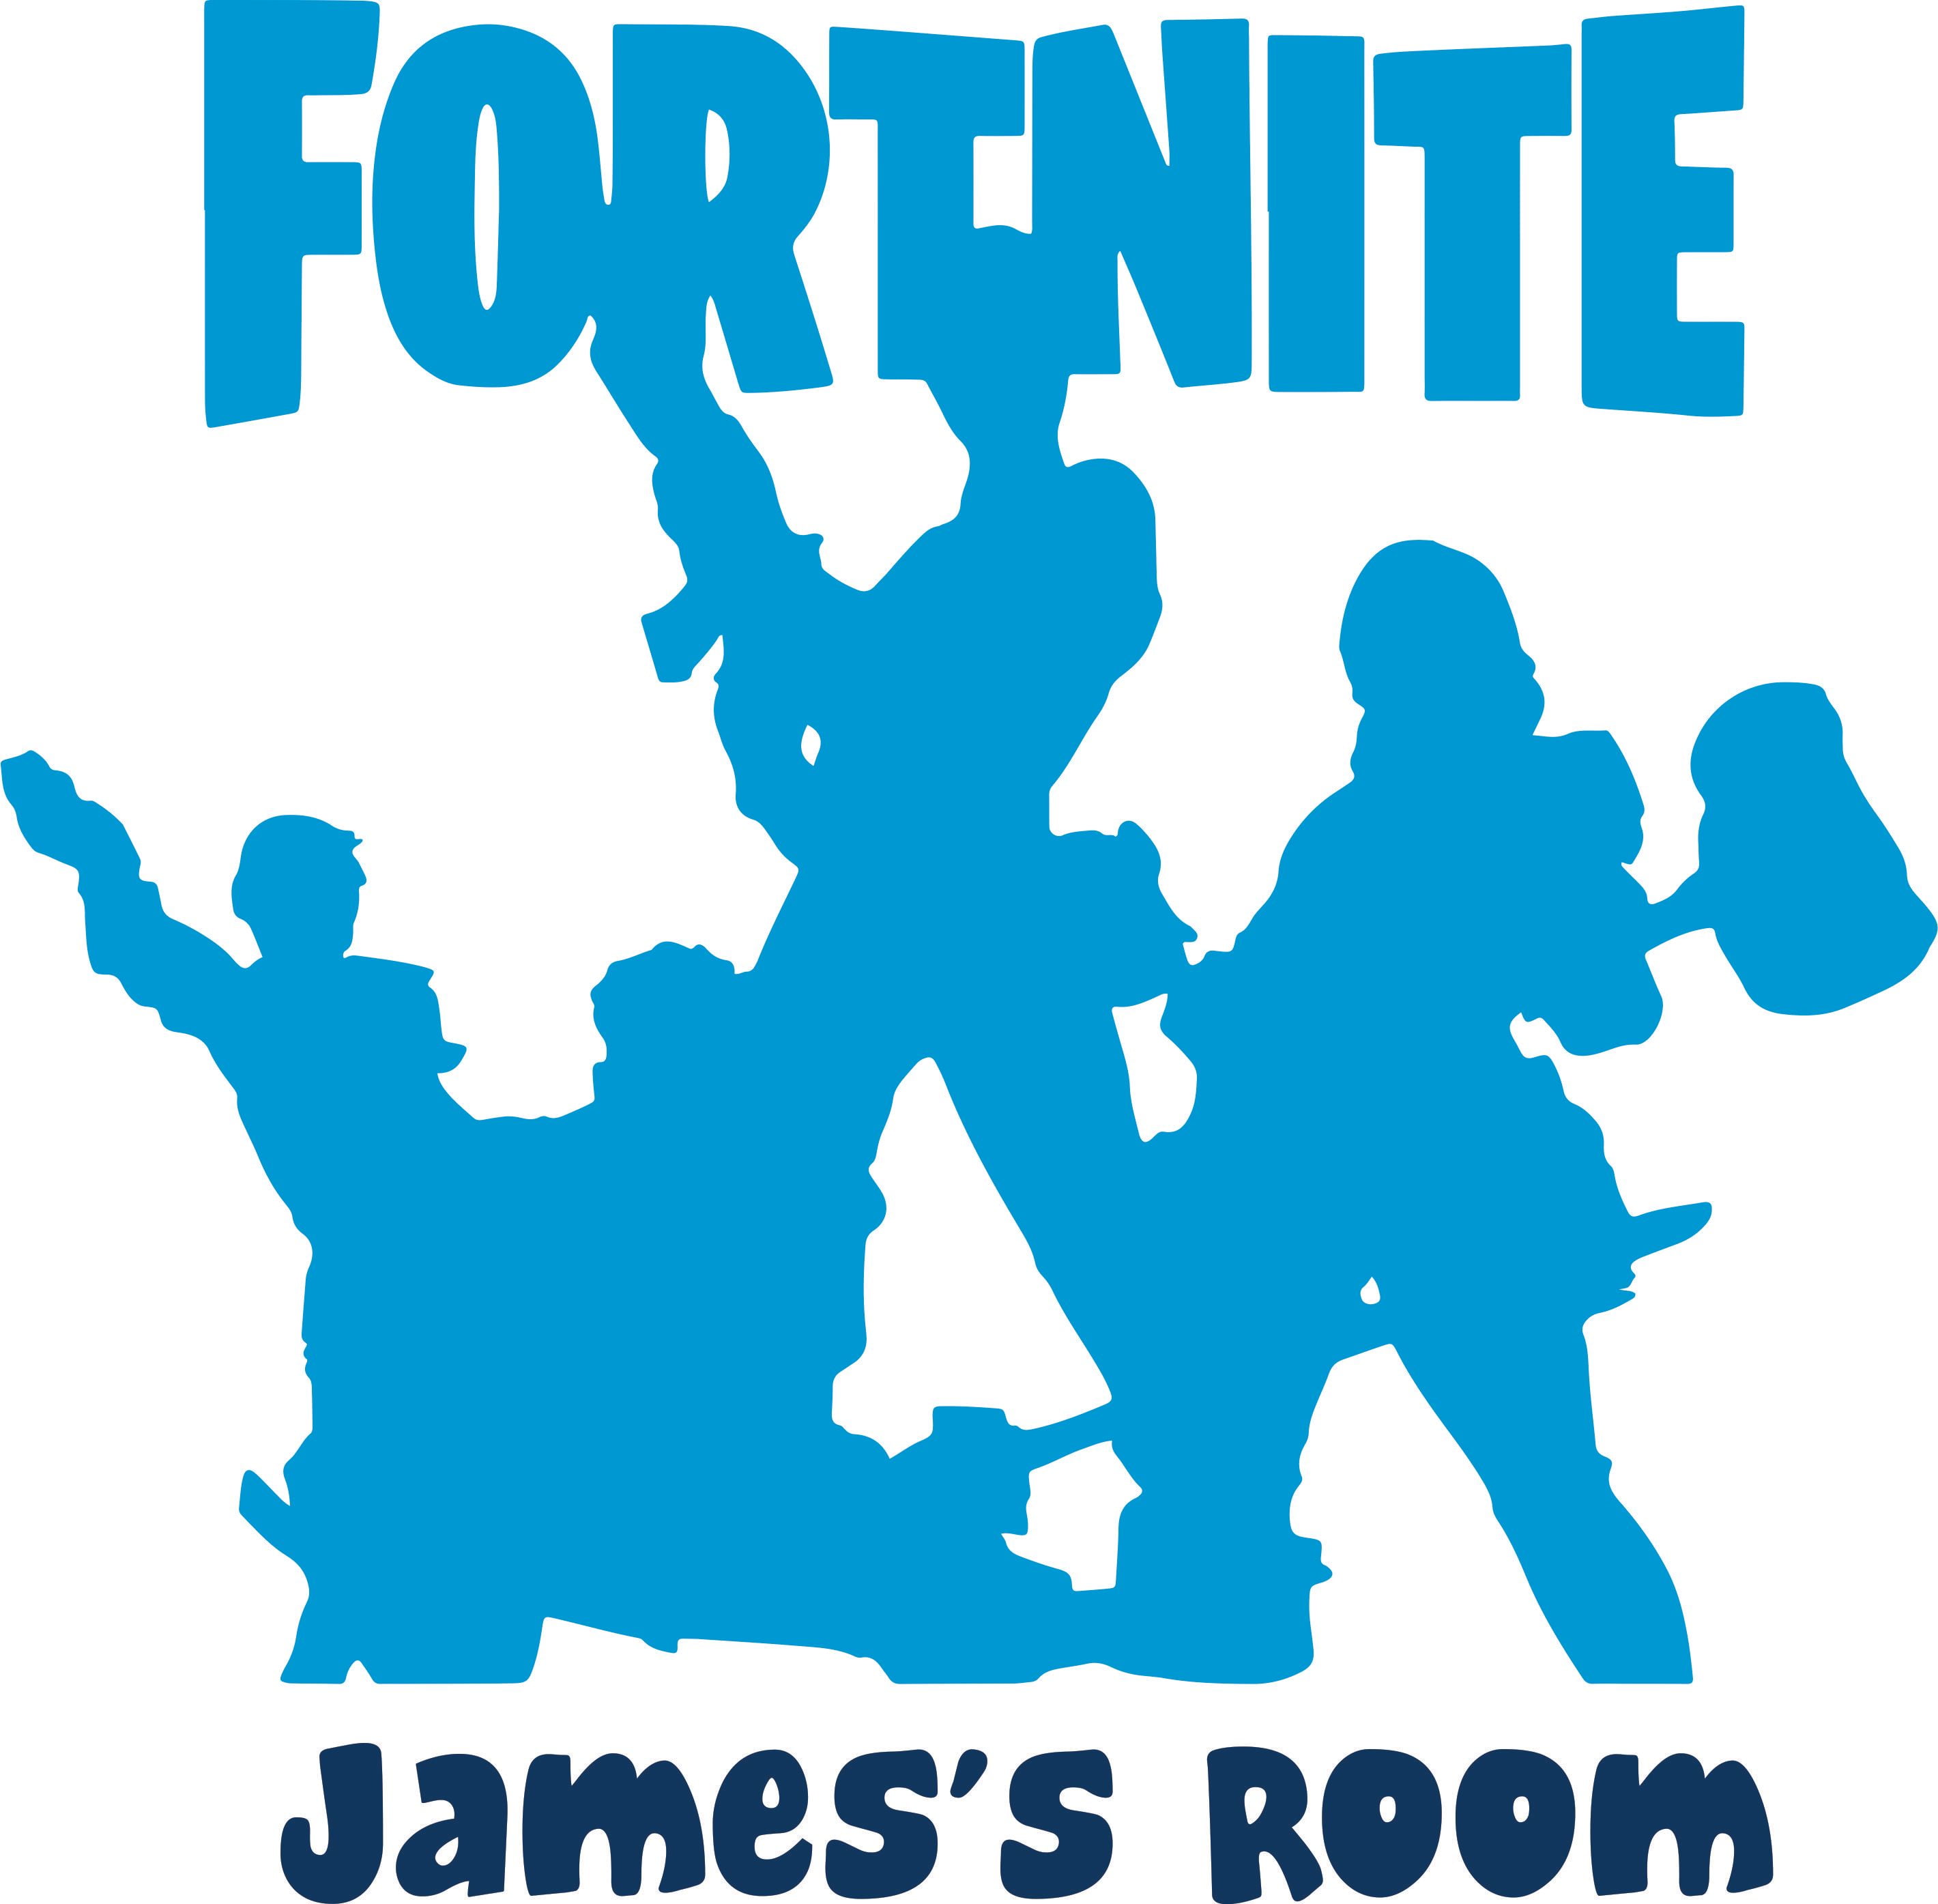 Fortnite PERSONALIZED NAME Decal WALL STICKER Decor Mural Kids Video Game WP137